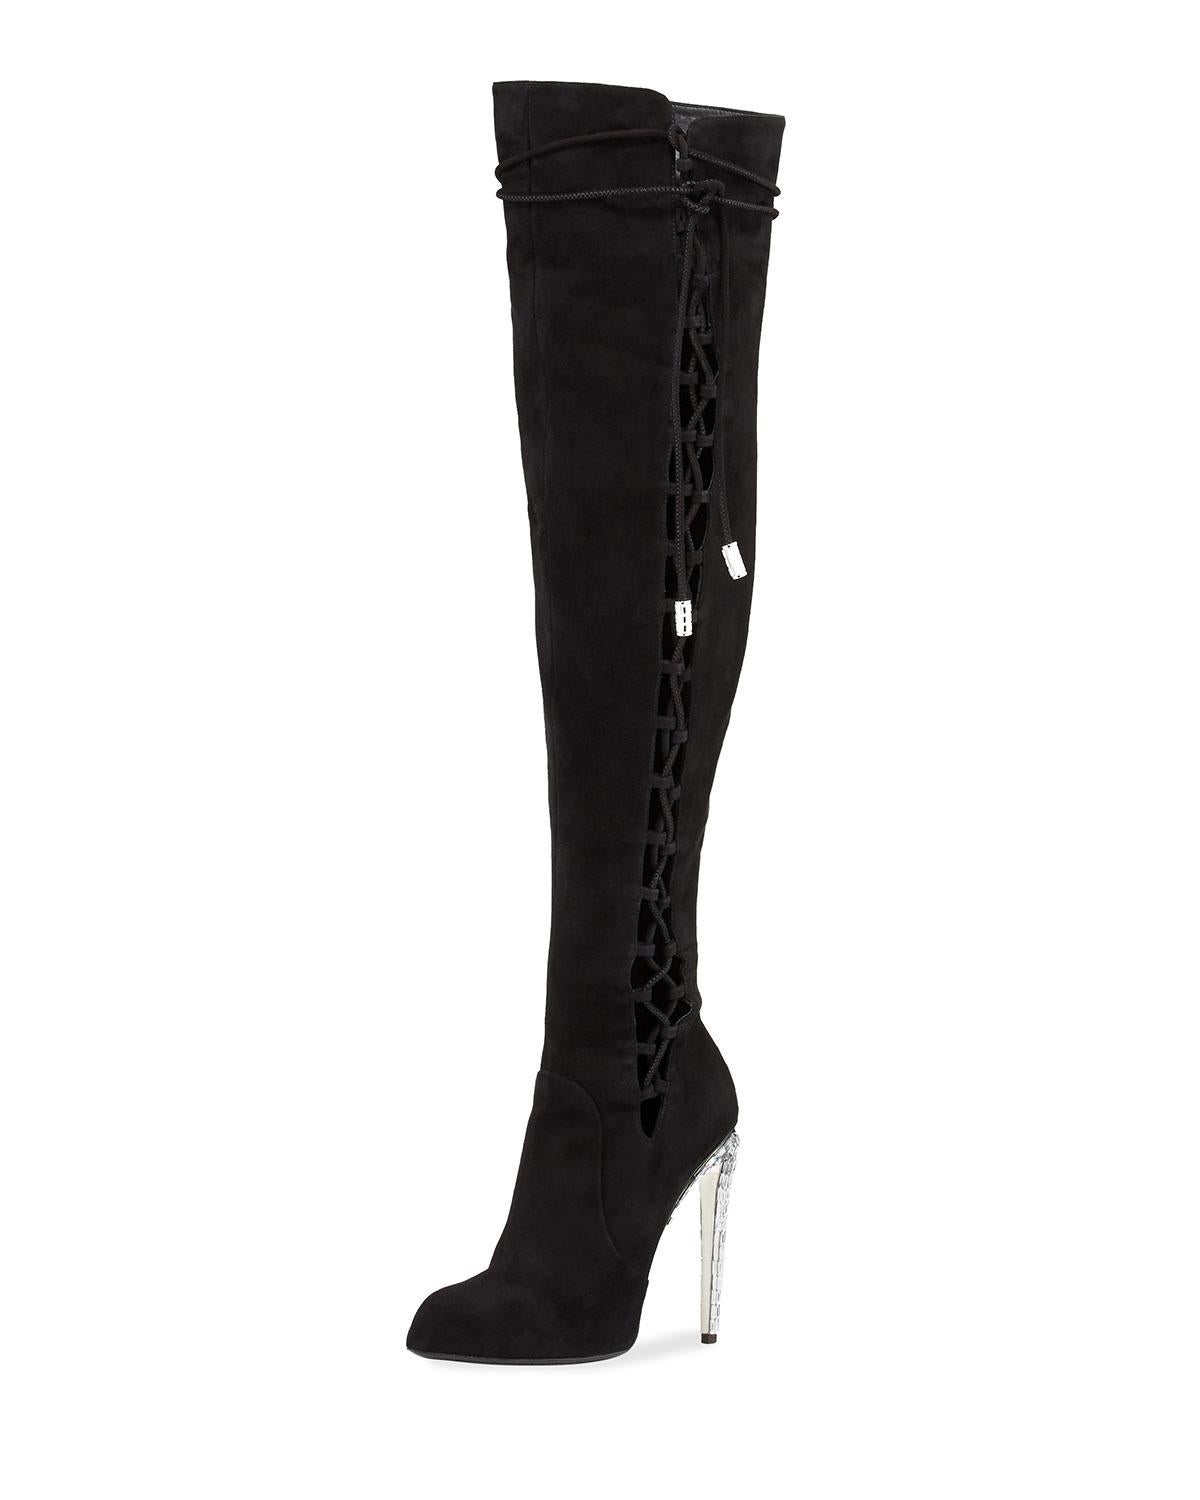 Sparkle brilliantly wearing these Giuseppe Zanotti Giuseppe for Jennifer Lopez Over-the-Knee Sexy Boots.
Designer size 38 - US 8
Black suede leather upper, Pull-on construction.
5 inches crystal-embellished stiletto heel.
Lace-up side with self-tie